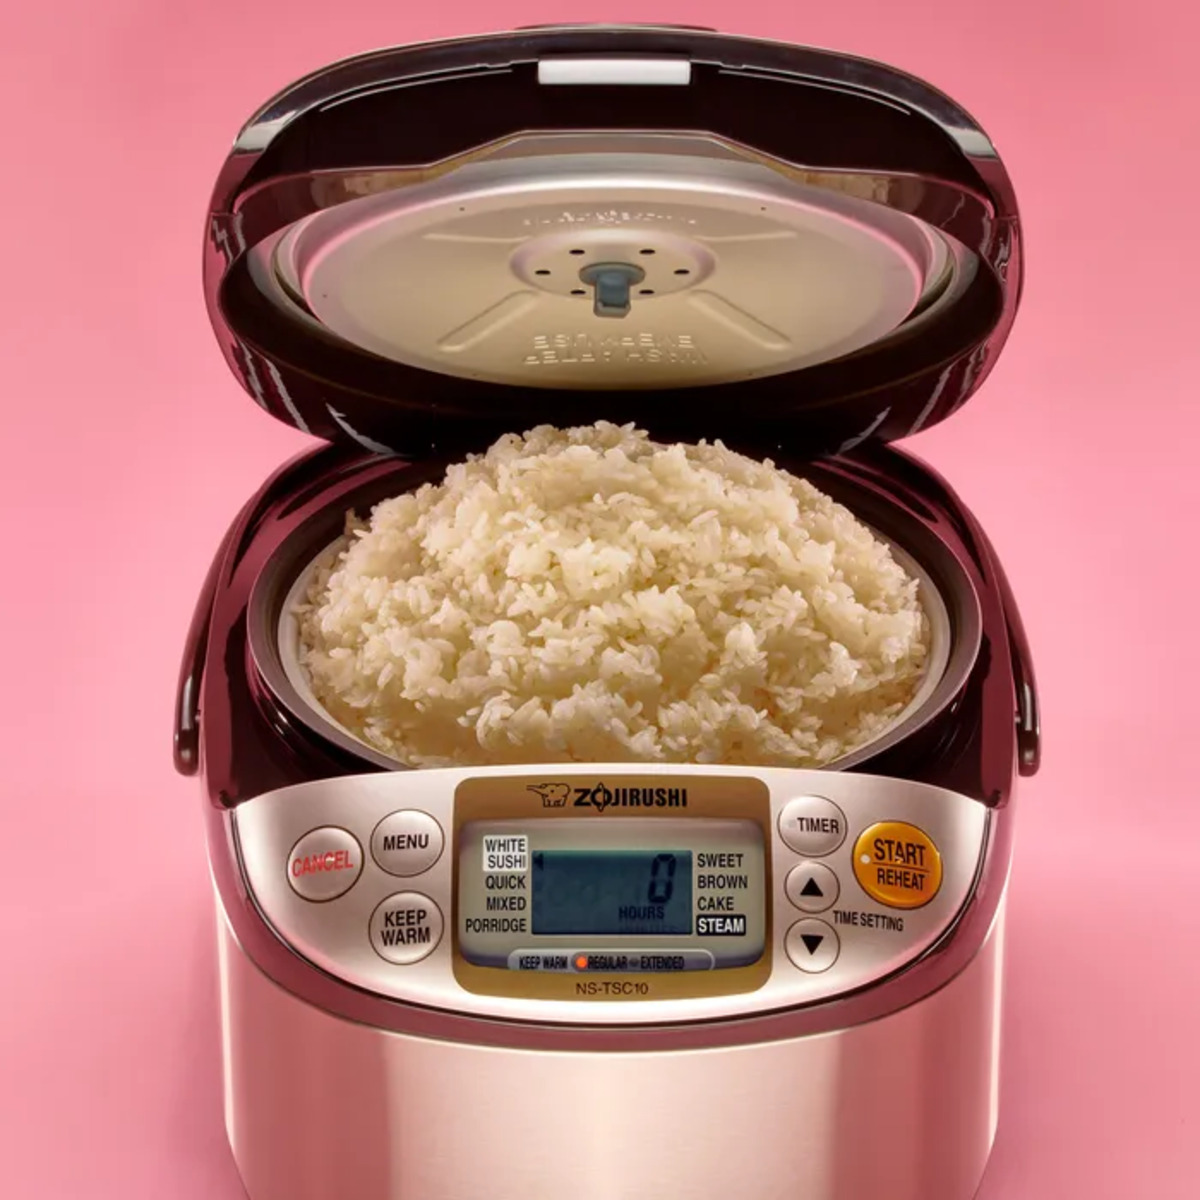 How To Make Sticky Rice In Zojirushi Rice Cooker